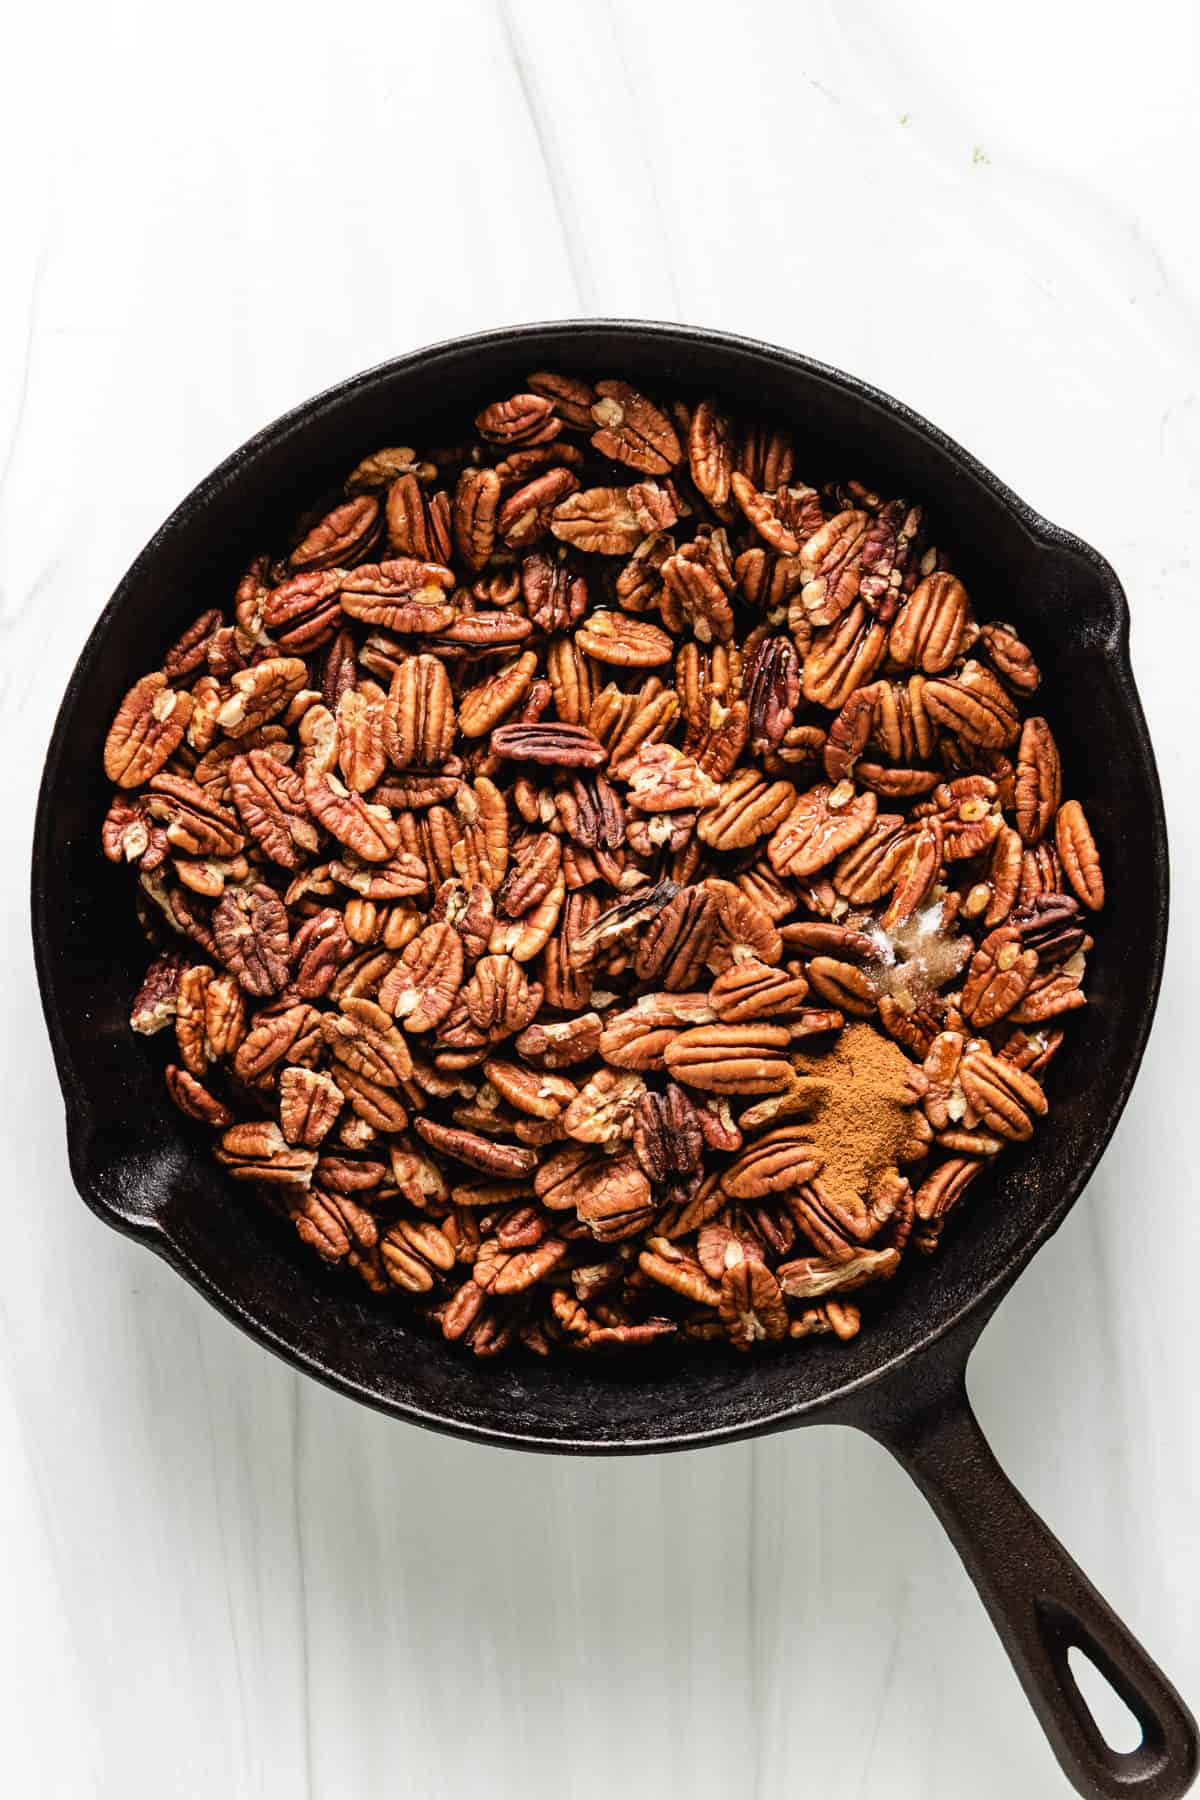 Pecan halves with maple syrup and cinnamon.